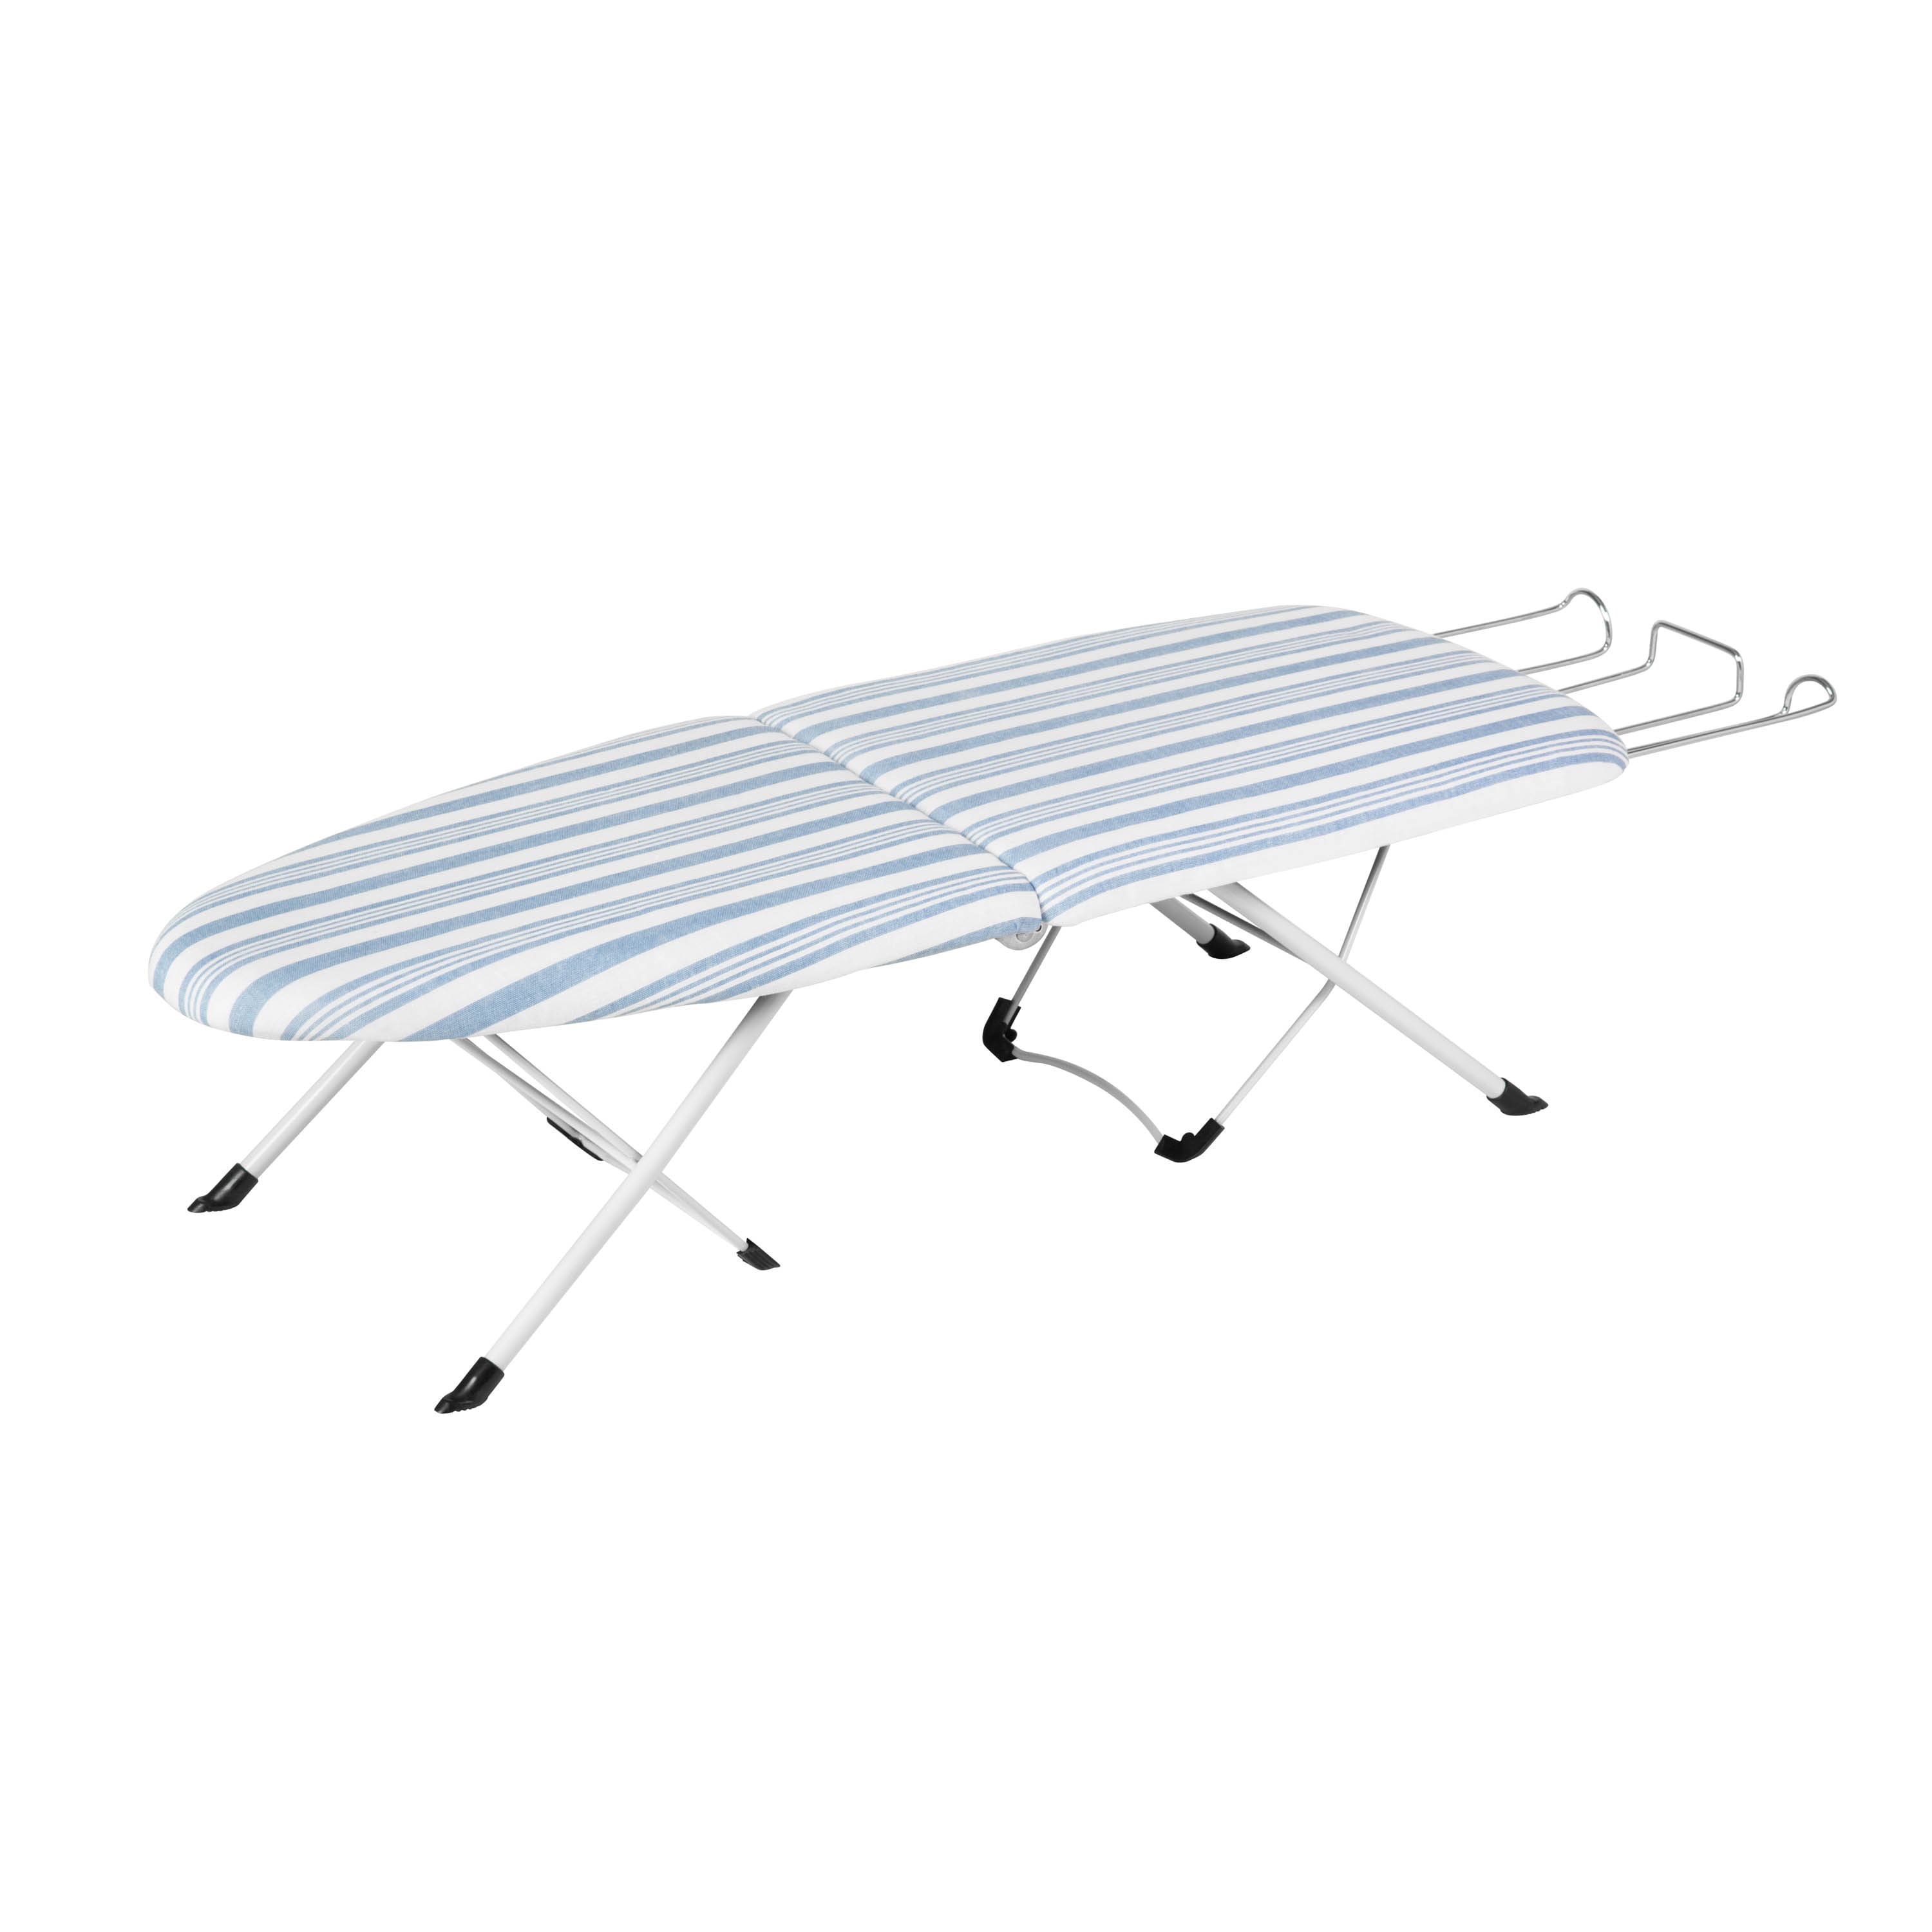 Honey-Can-Do Foldable Tabletop Ironing Board with Iron Rest 